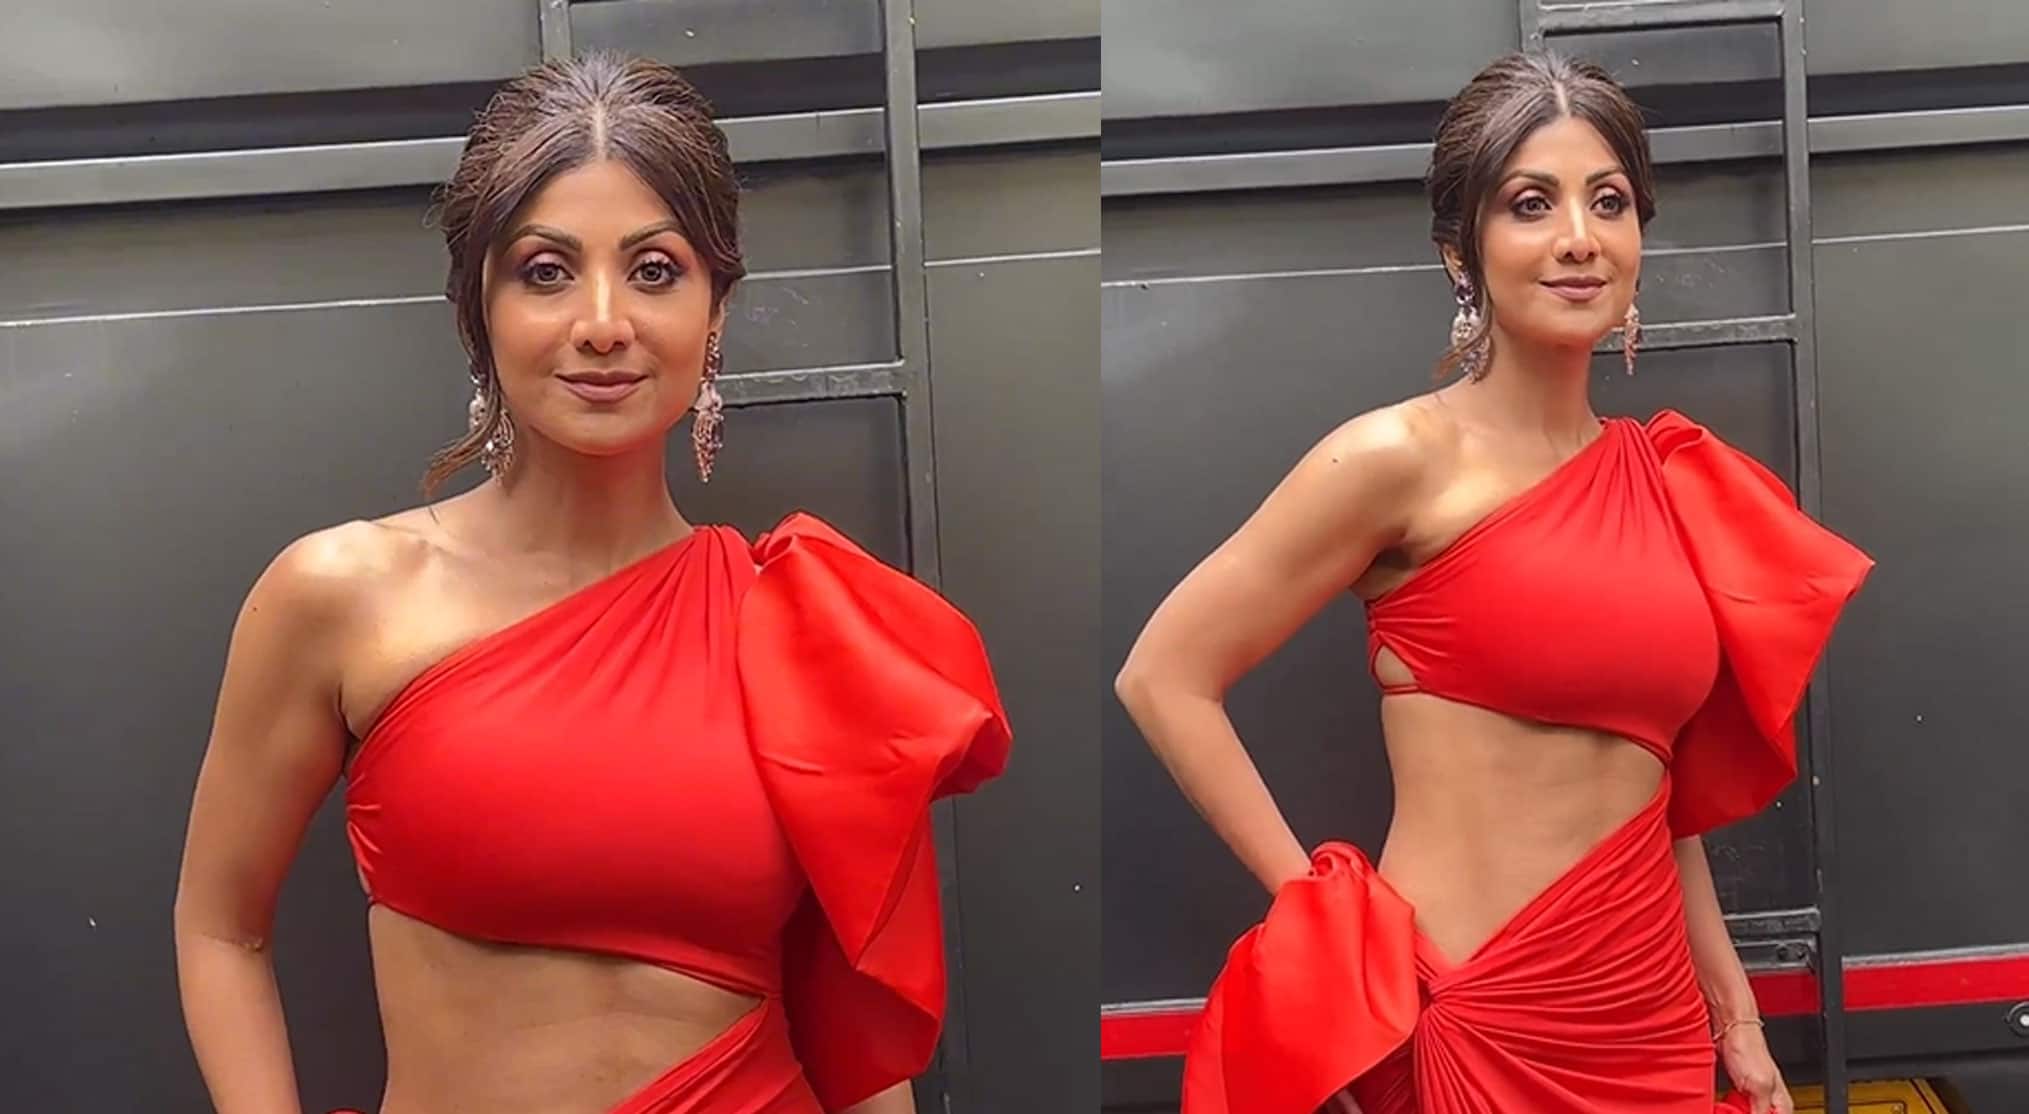 Shilpa Shetty Stuns In Cut-Out Red Dress, Flaunts Abs Thigh-High Slit Dress At 48